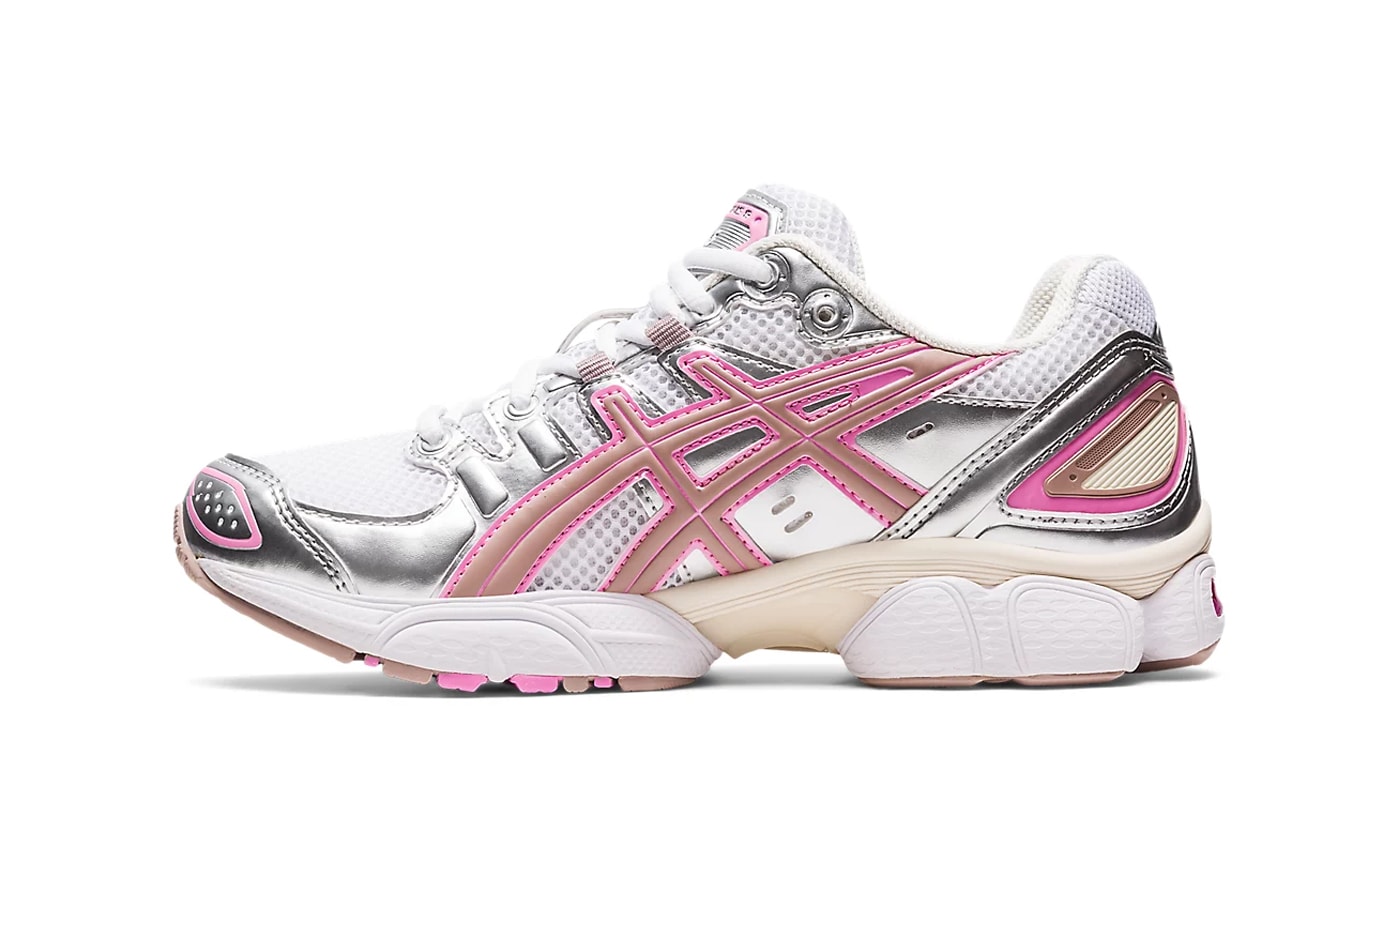 Asics Gel Nimbus 9 candy floss pink pure silver white y2k release info date price